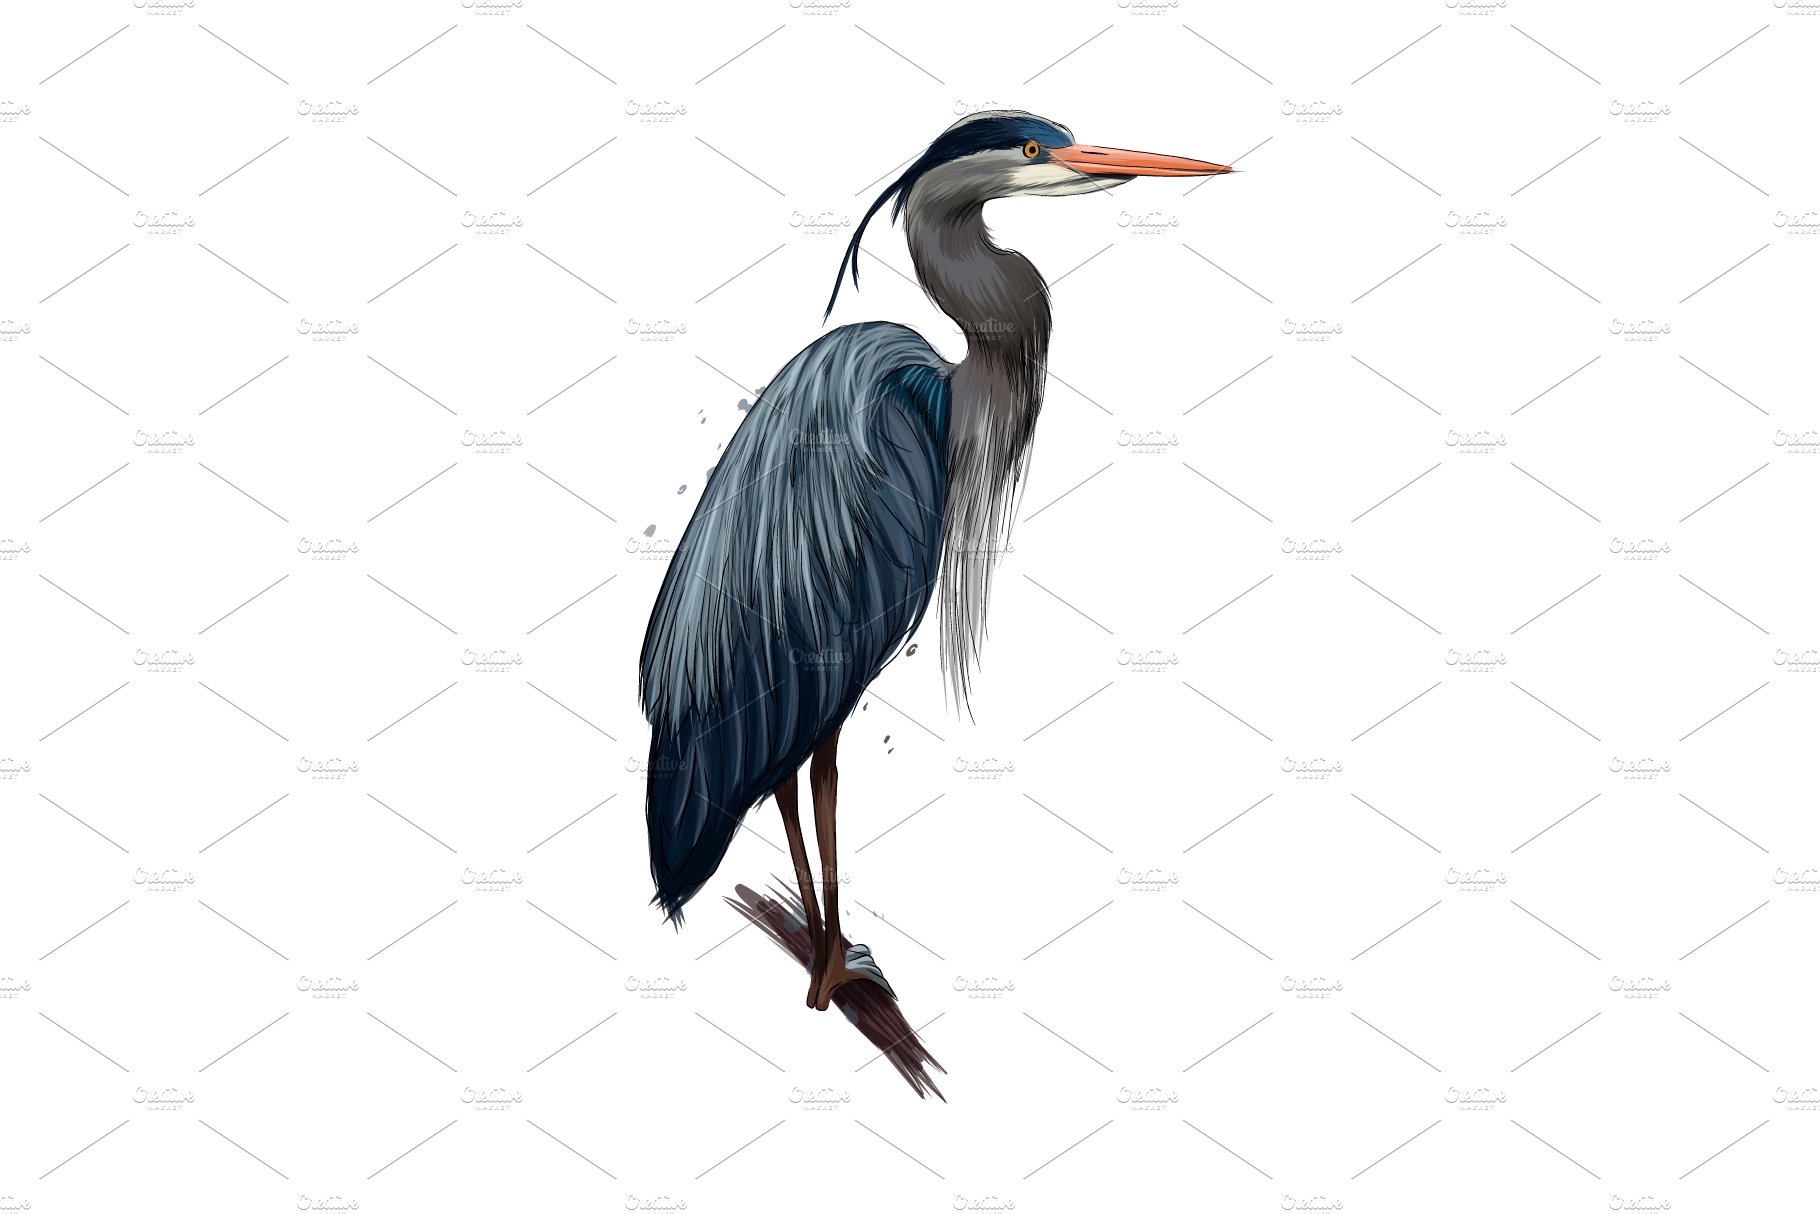 Egyptian heron, Great blue heron cover image.